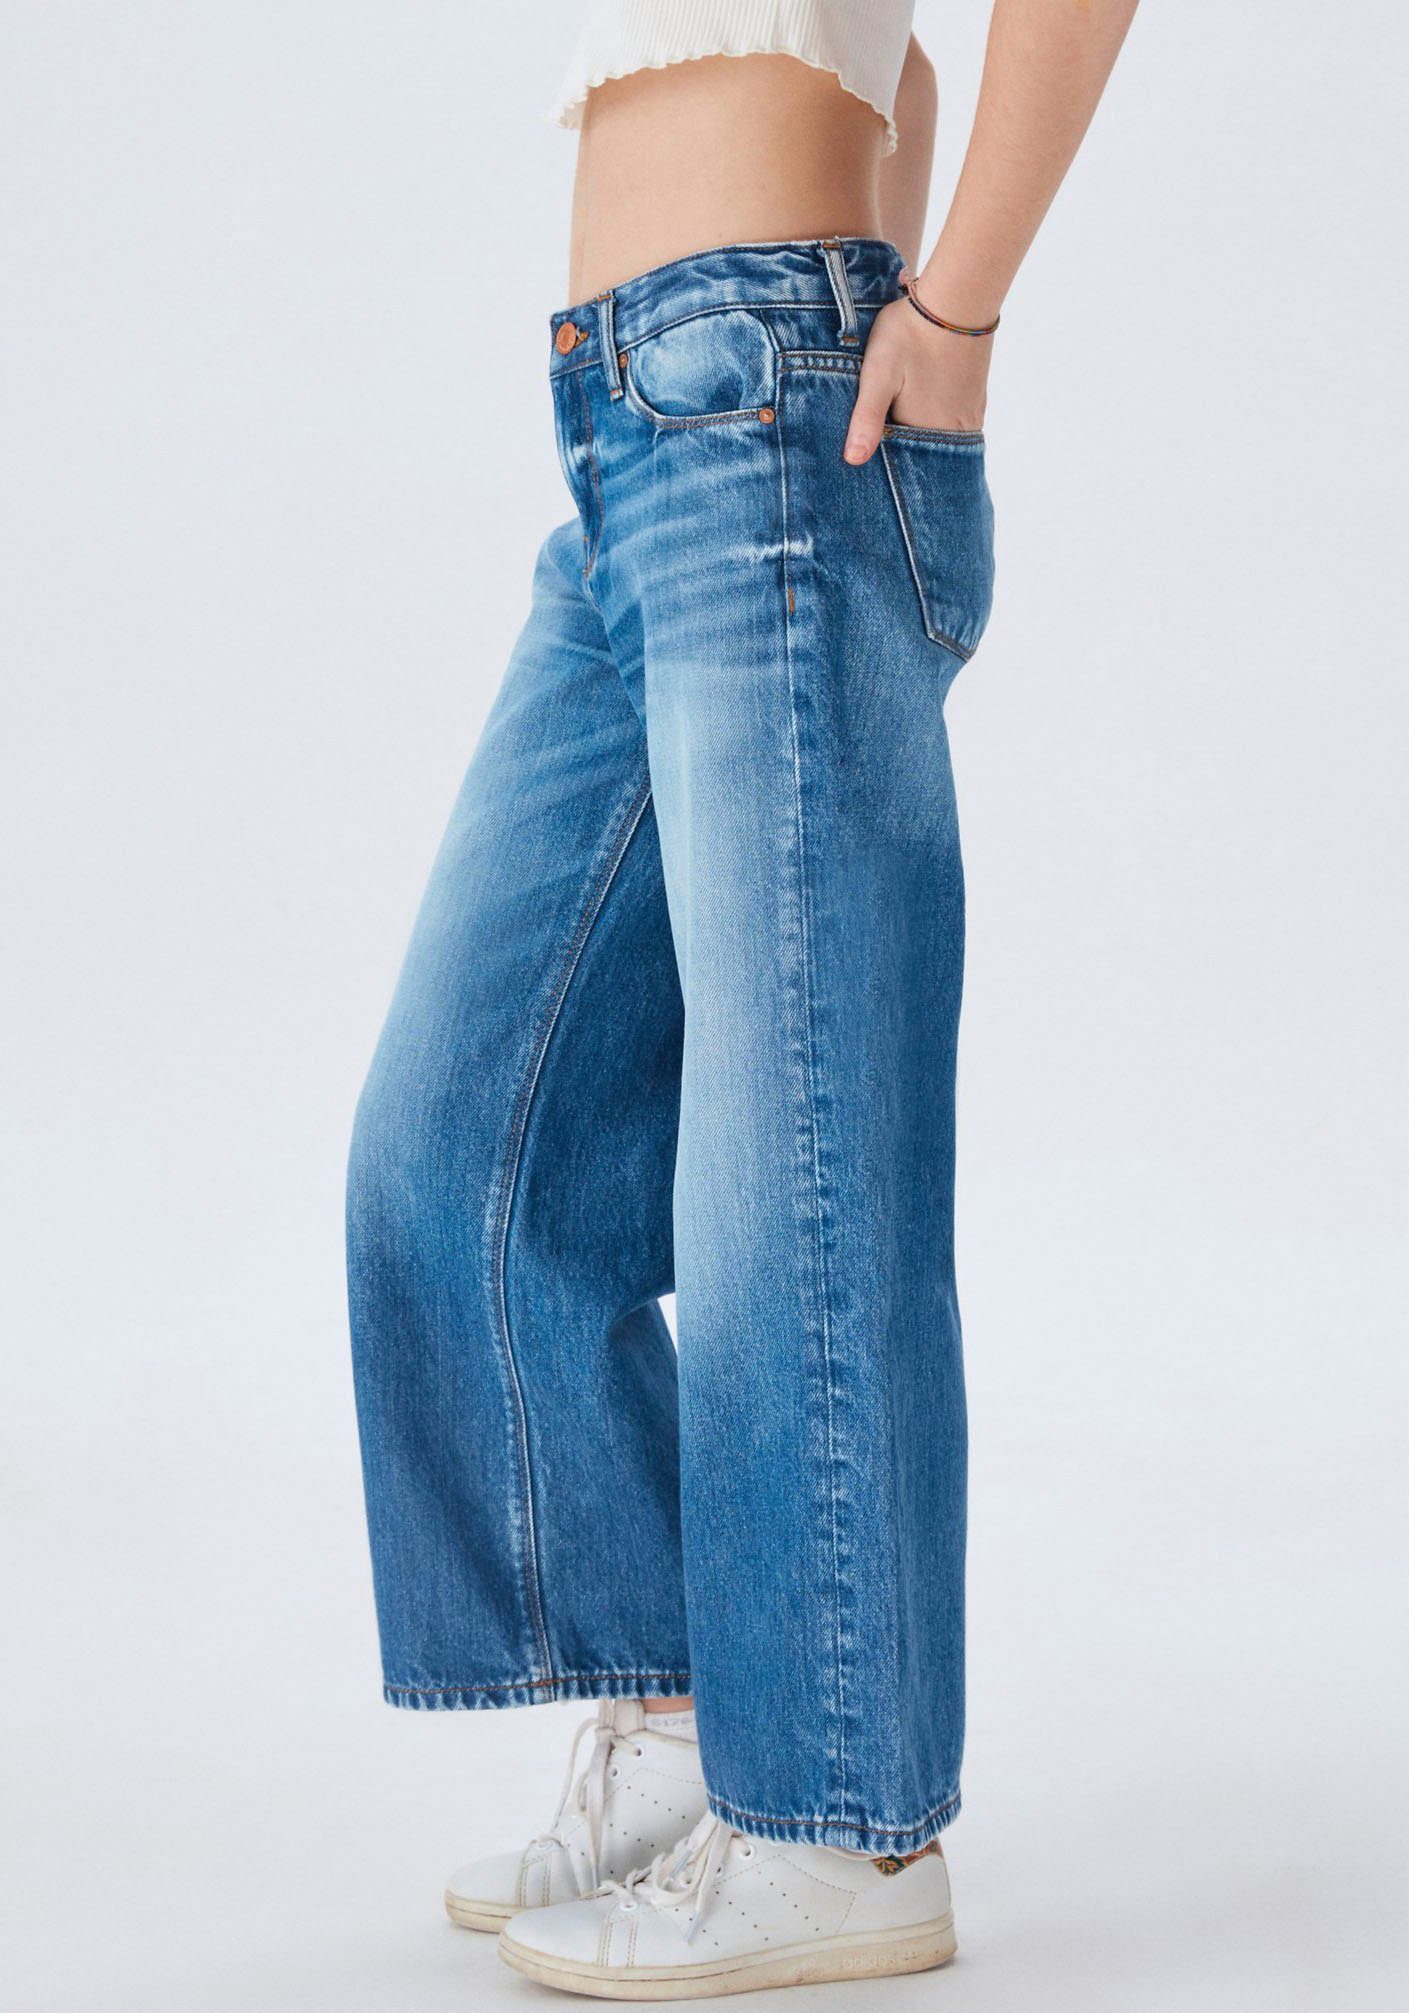 Stacy G LTB Jeans Weite